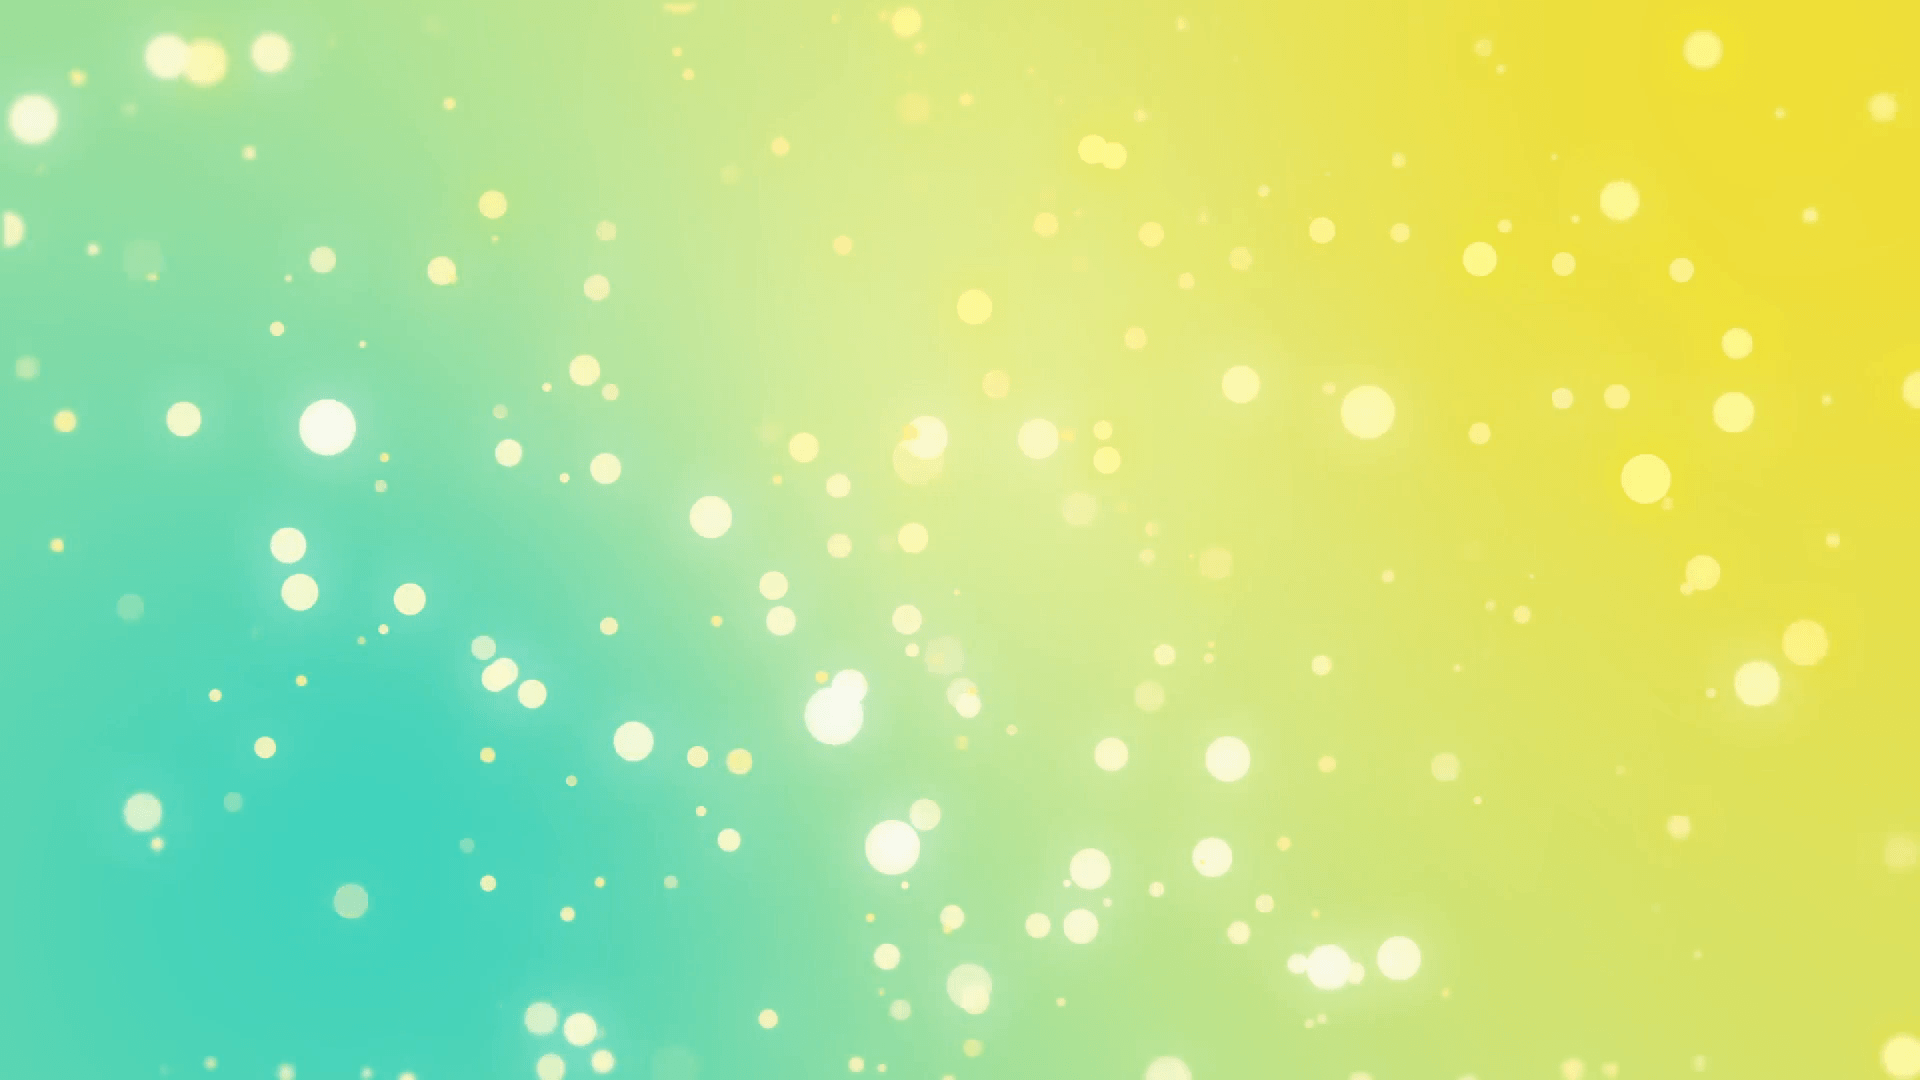 Sparkly light particles moving across a teal yellow gradient